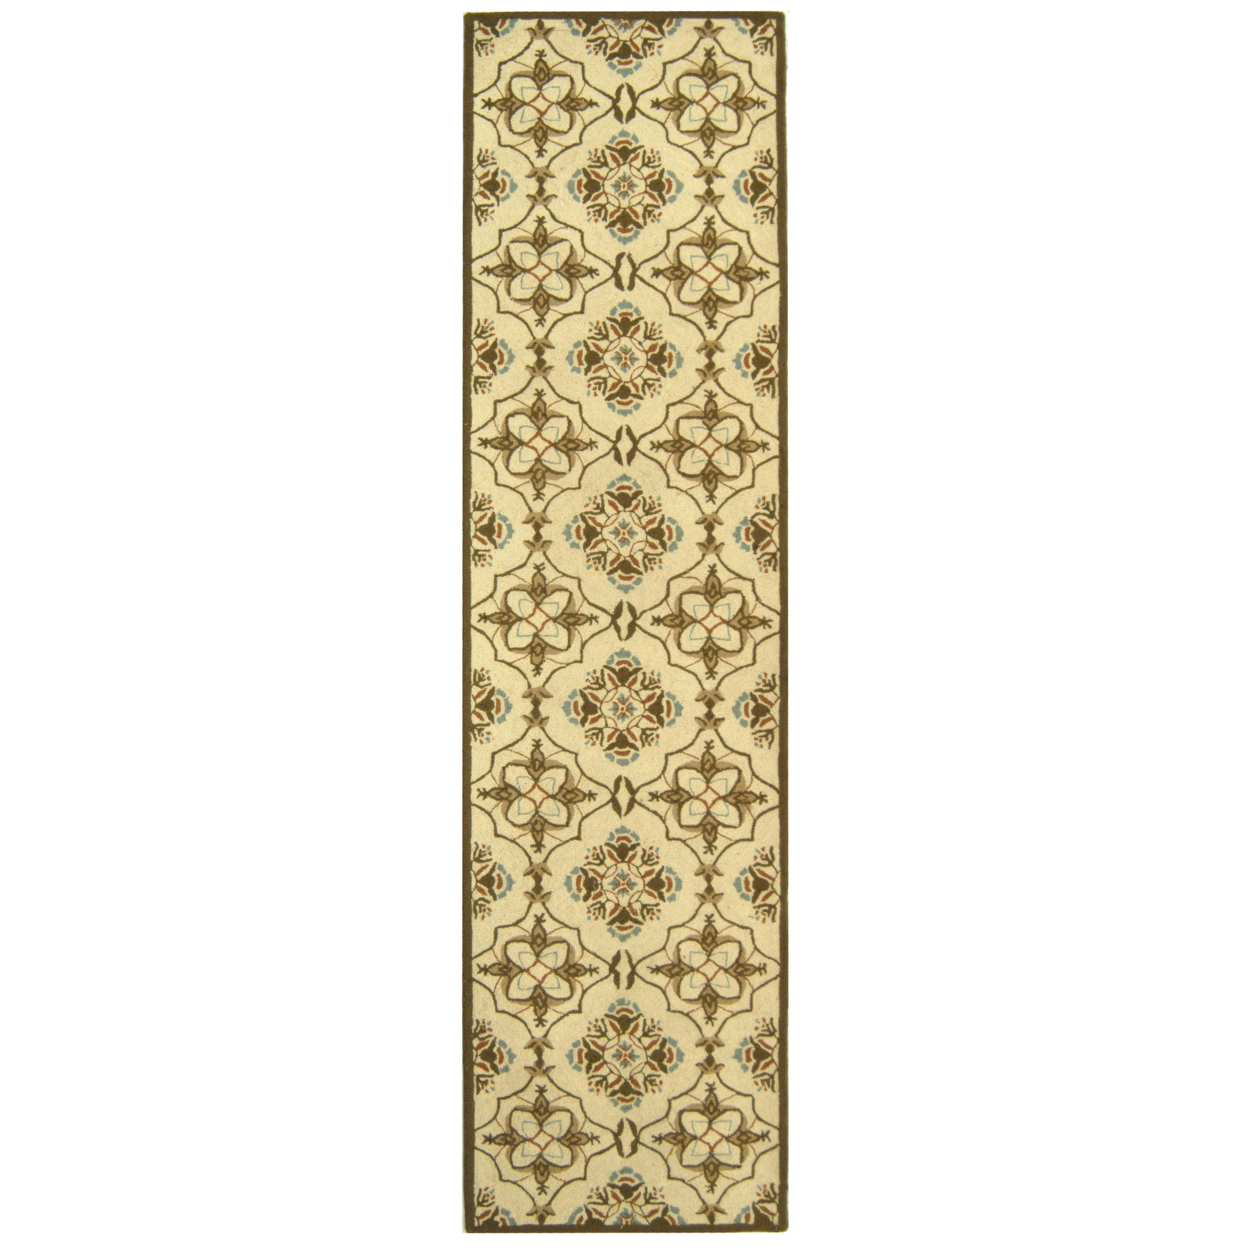 SAFAVIEH Chelsea HK376A Hand-hooked Ivory / Green Rug - 2' 6 X 6'